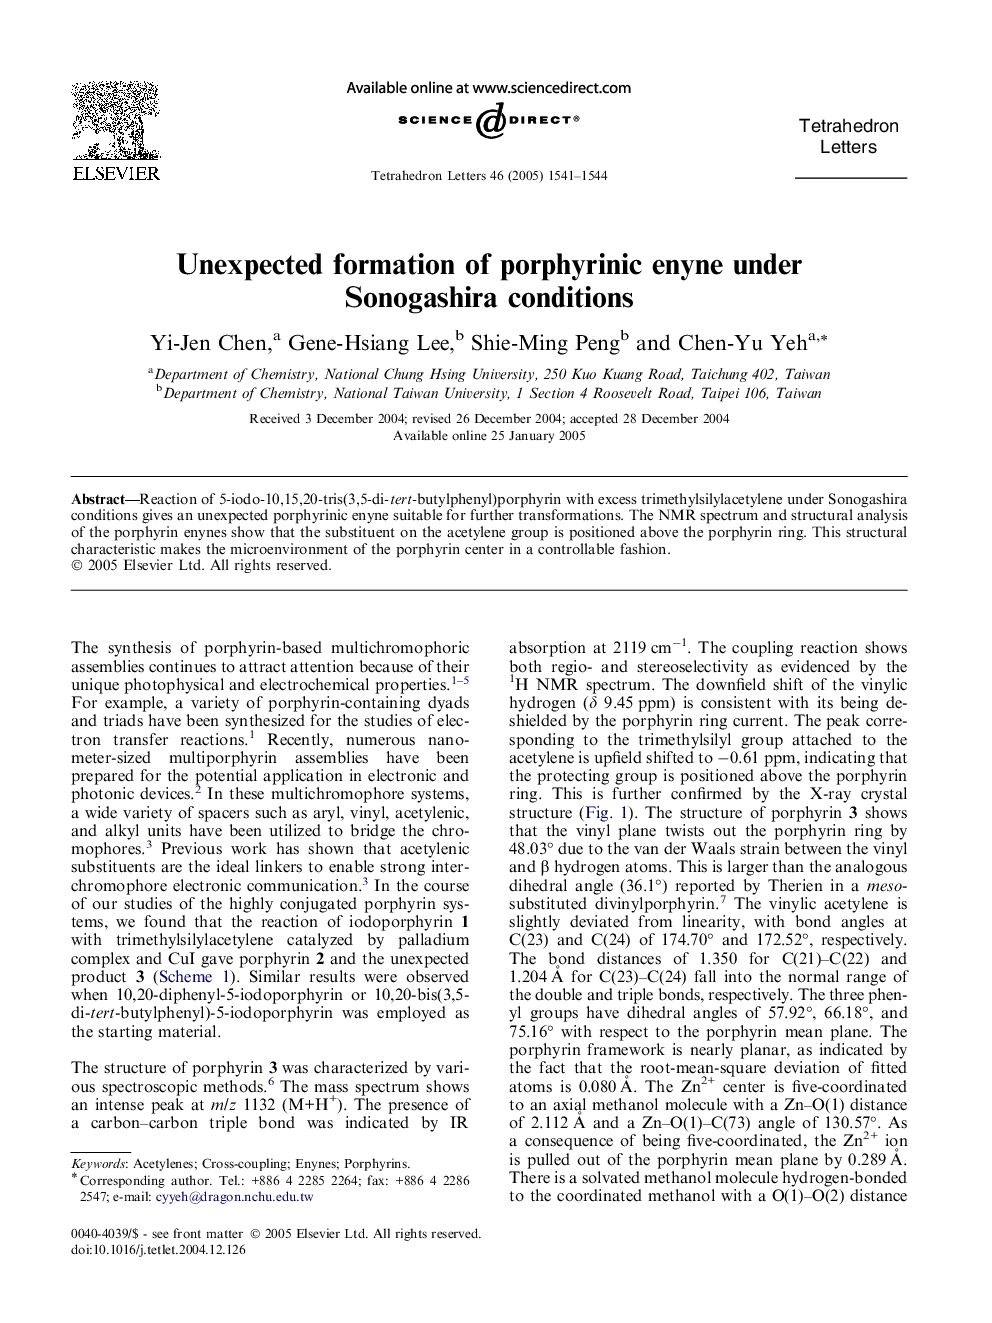 Unexpected formation of porphyrinic enyne under Sonogashira conditions